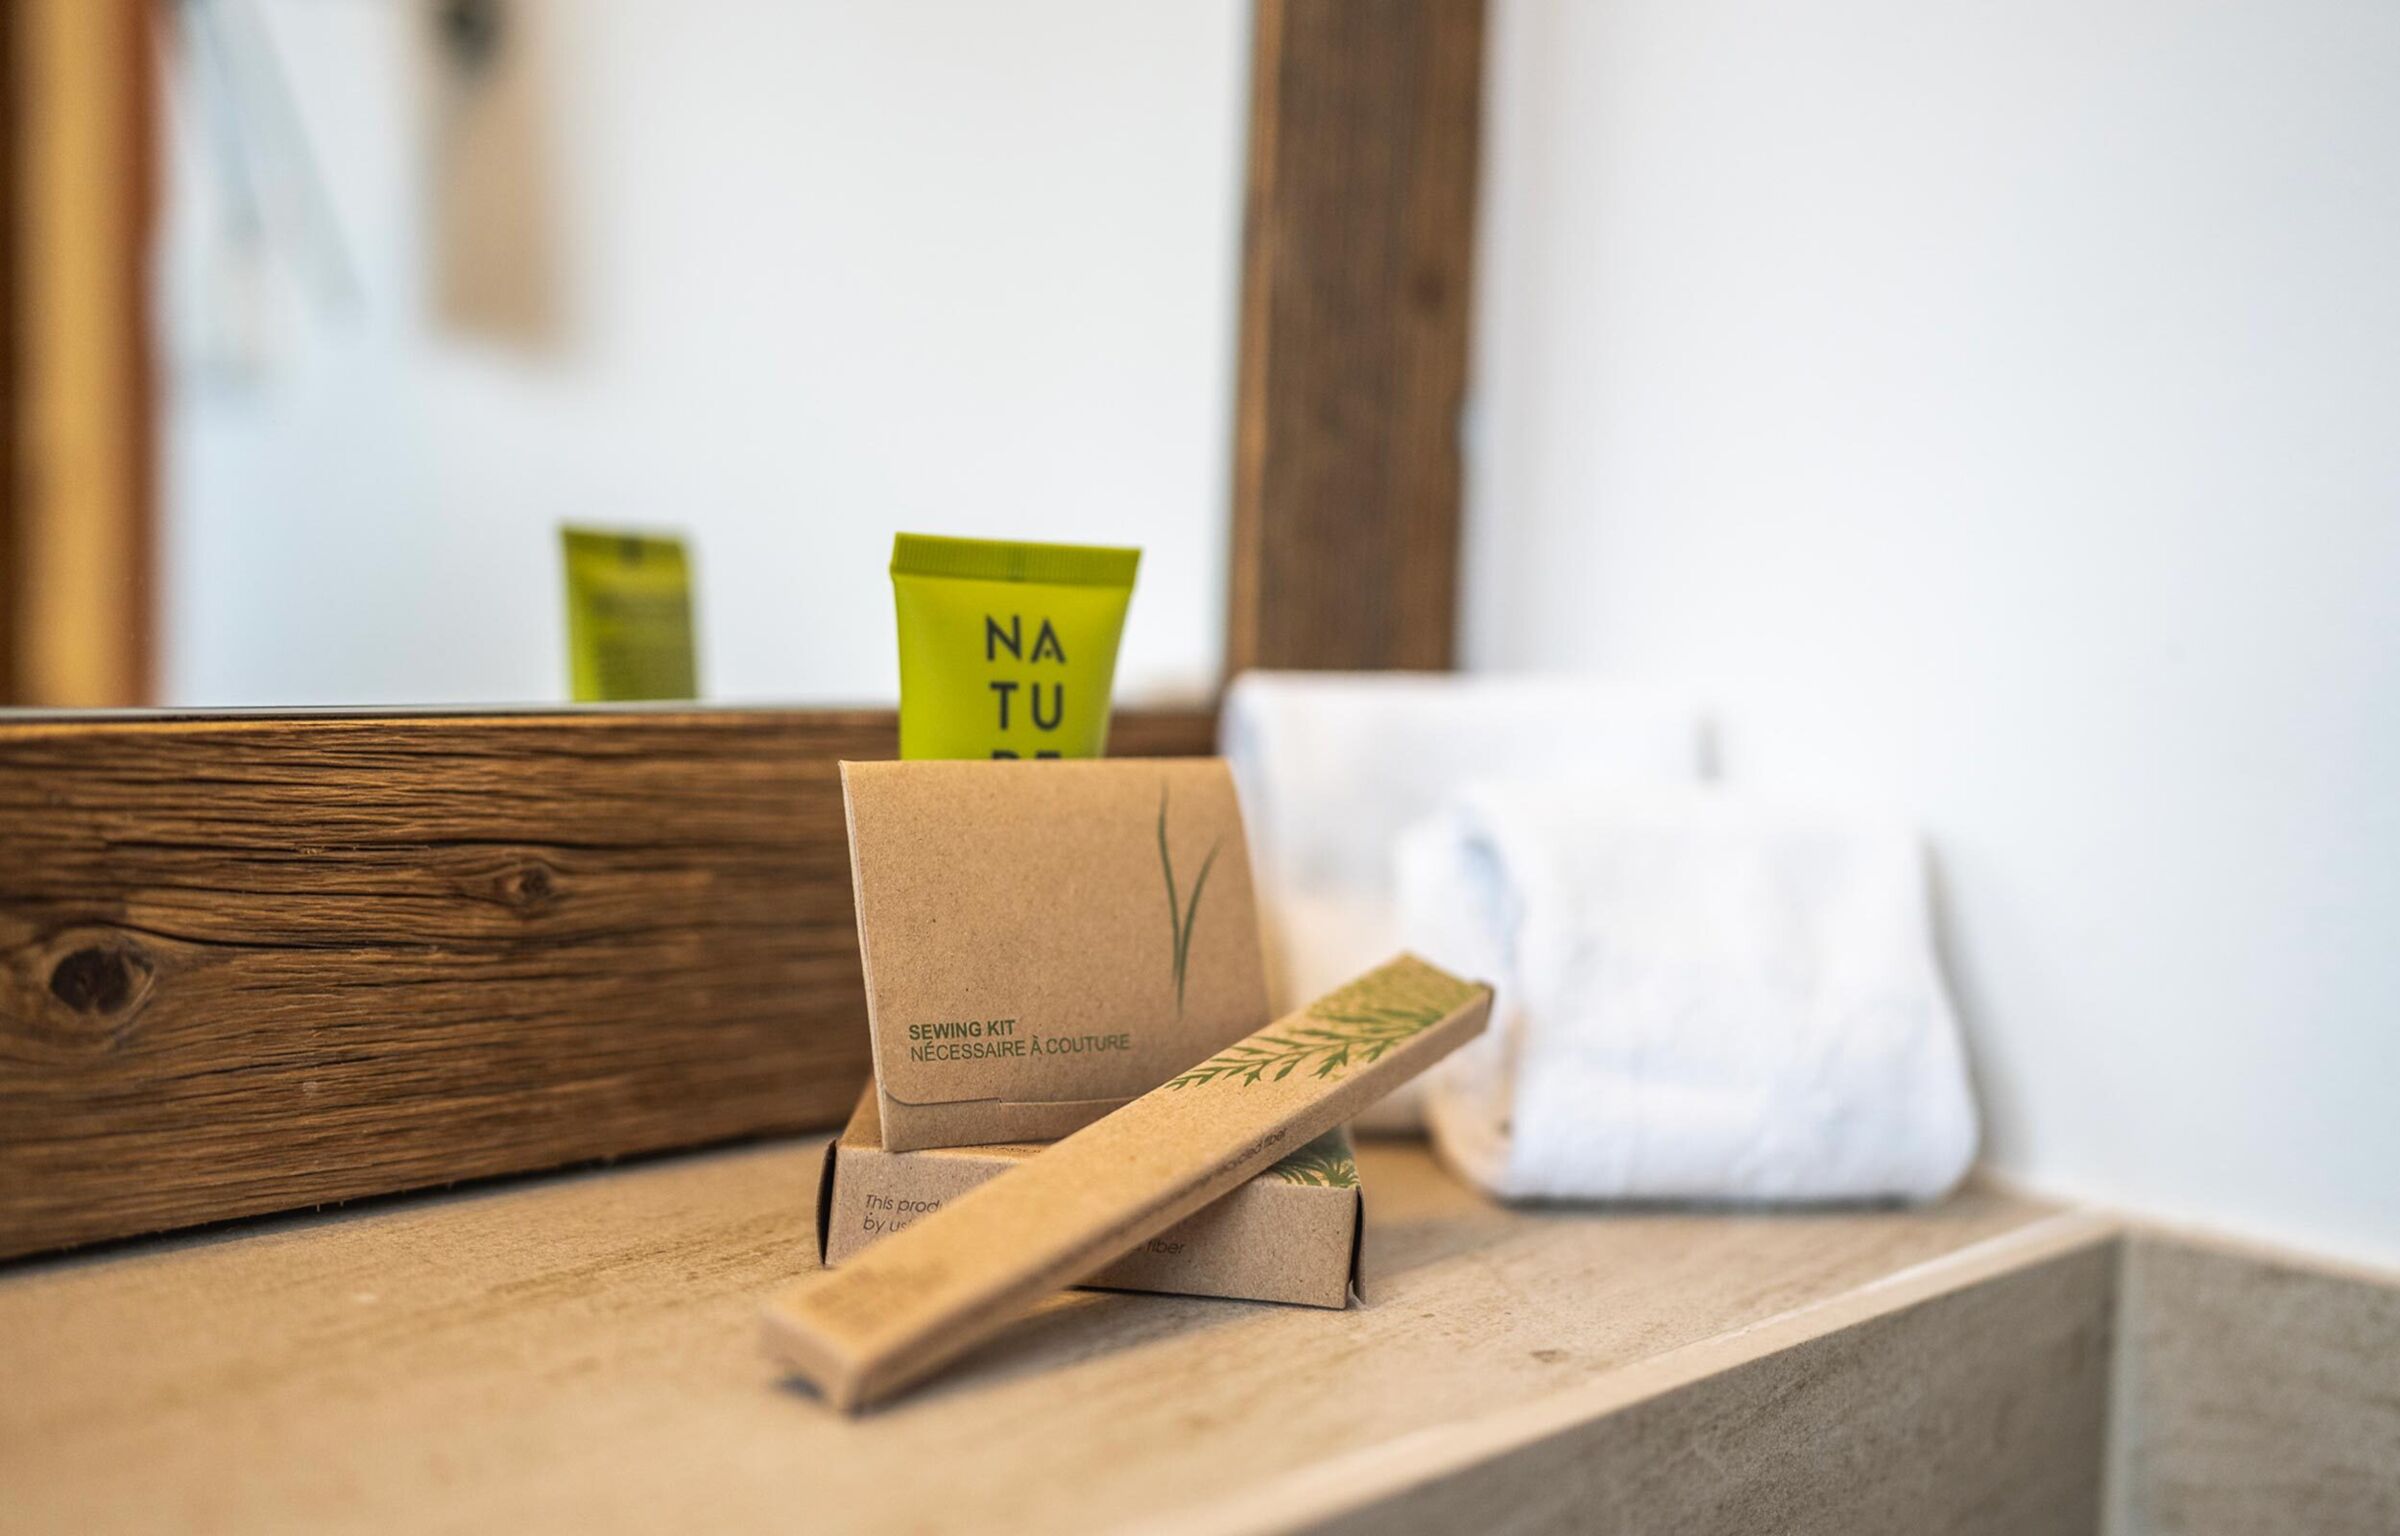 Natural products for the bathroom stand on a wooden shelf.